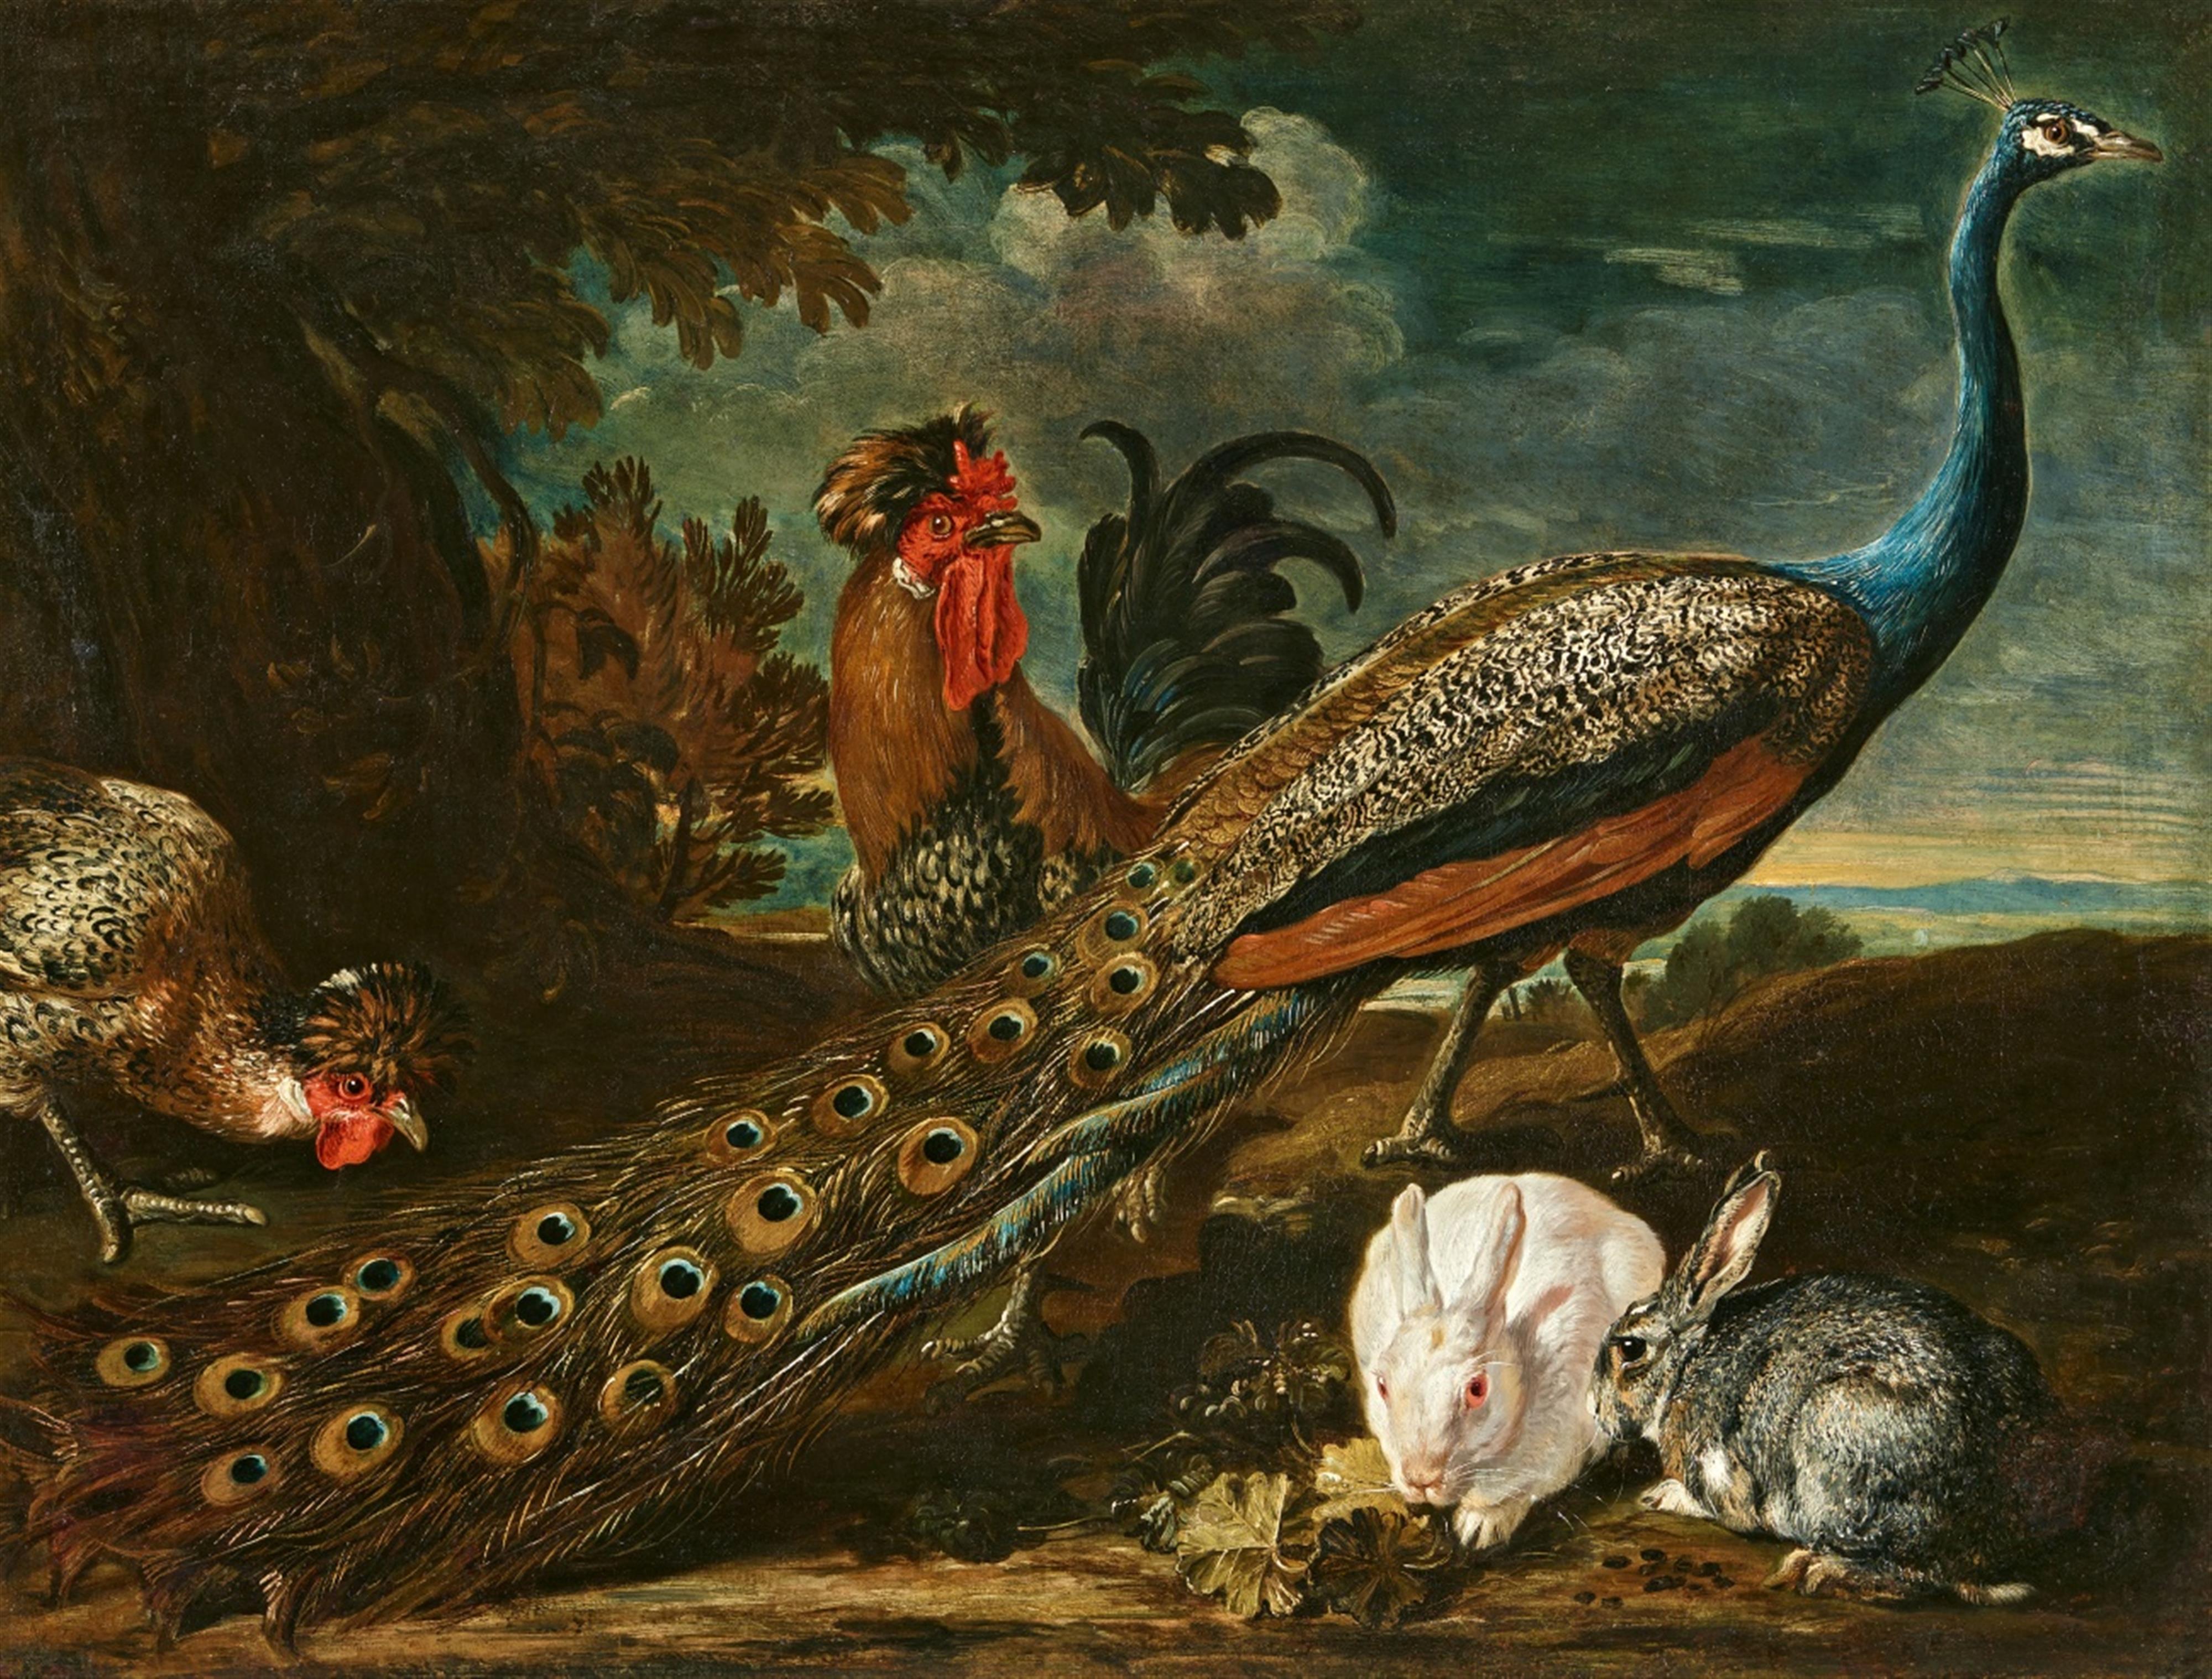 David de Coninck - A Turkey, Two Dogs and Two Pigeons in Front of a Landscape
A Peacock, Two Chickens and Two Rabbits in Front of a Landscape - image-2